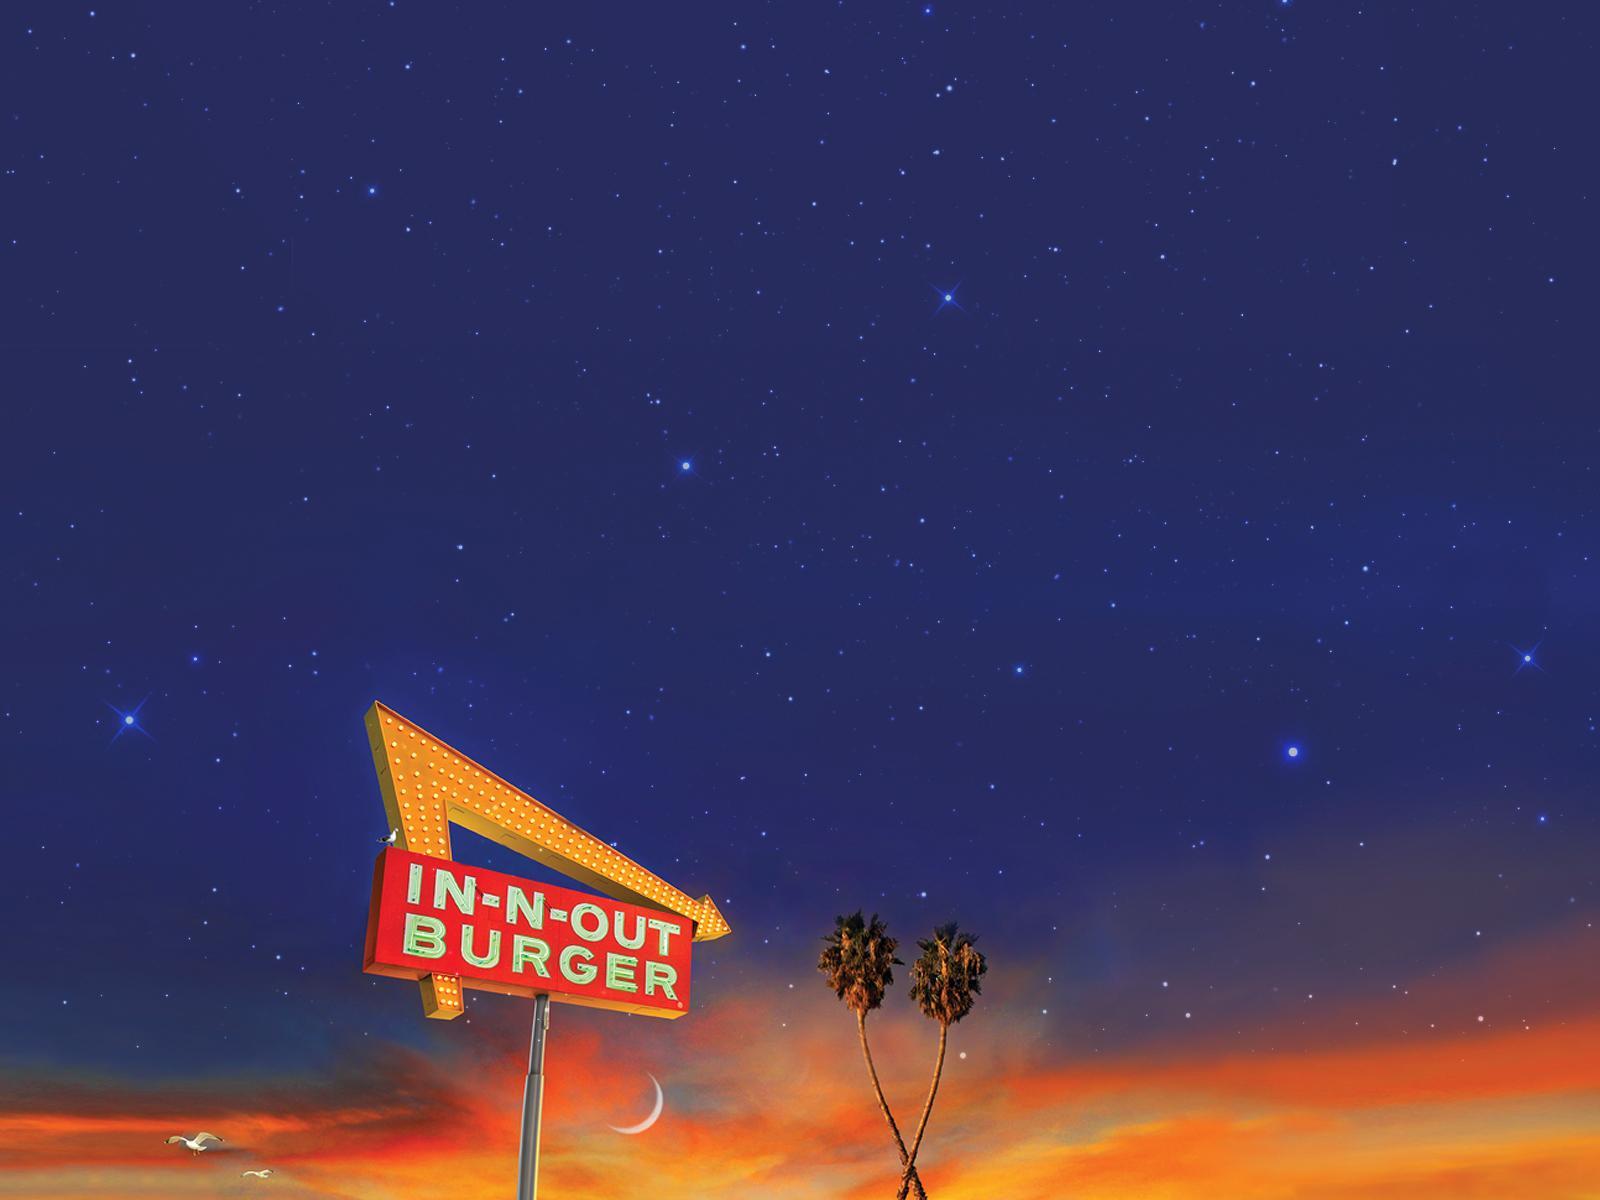 In-N-Out Burger Desktop Wallpaper, In-N-Out Burger, Other